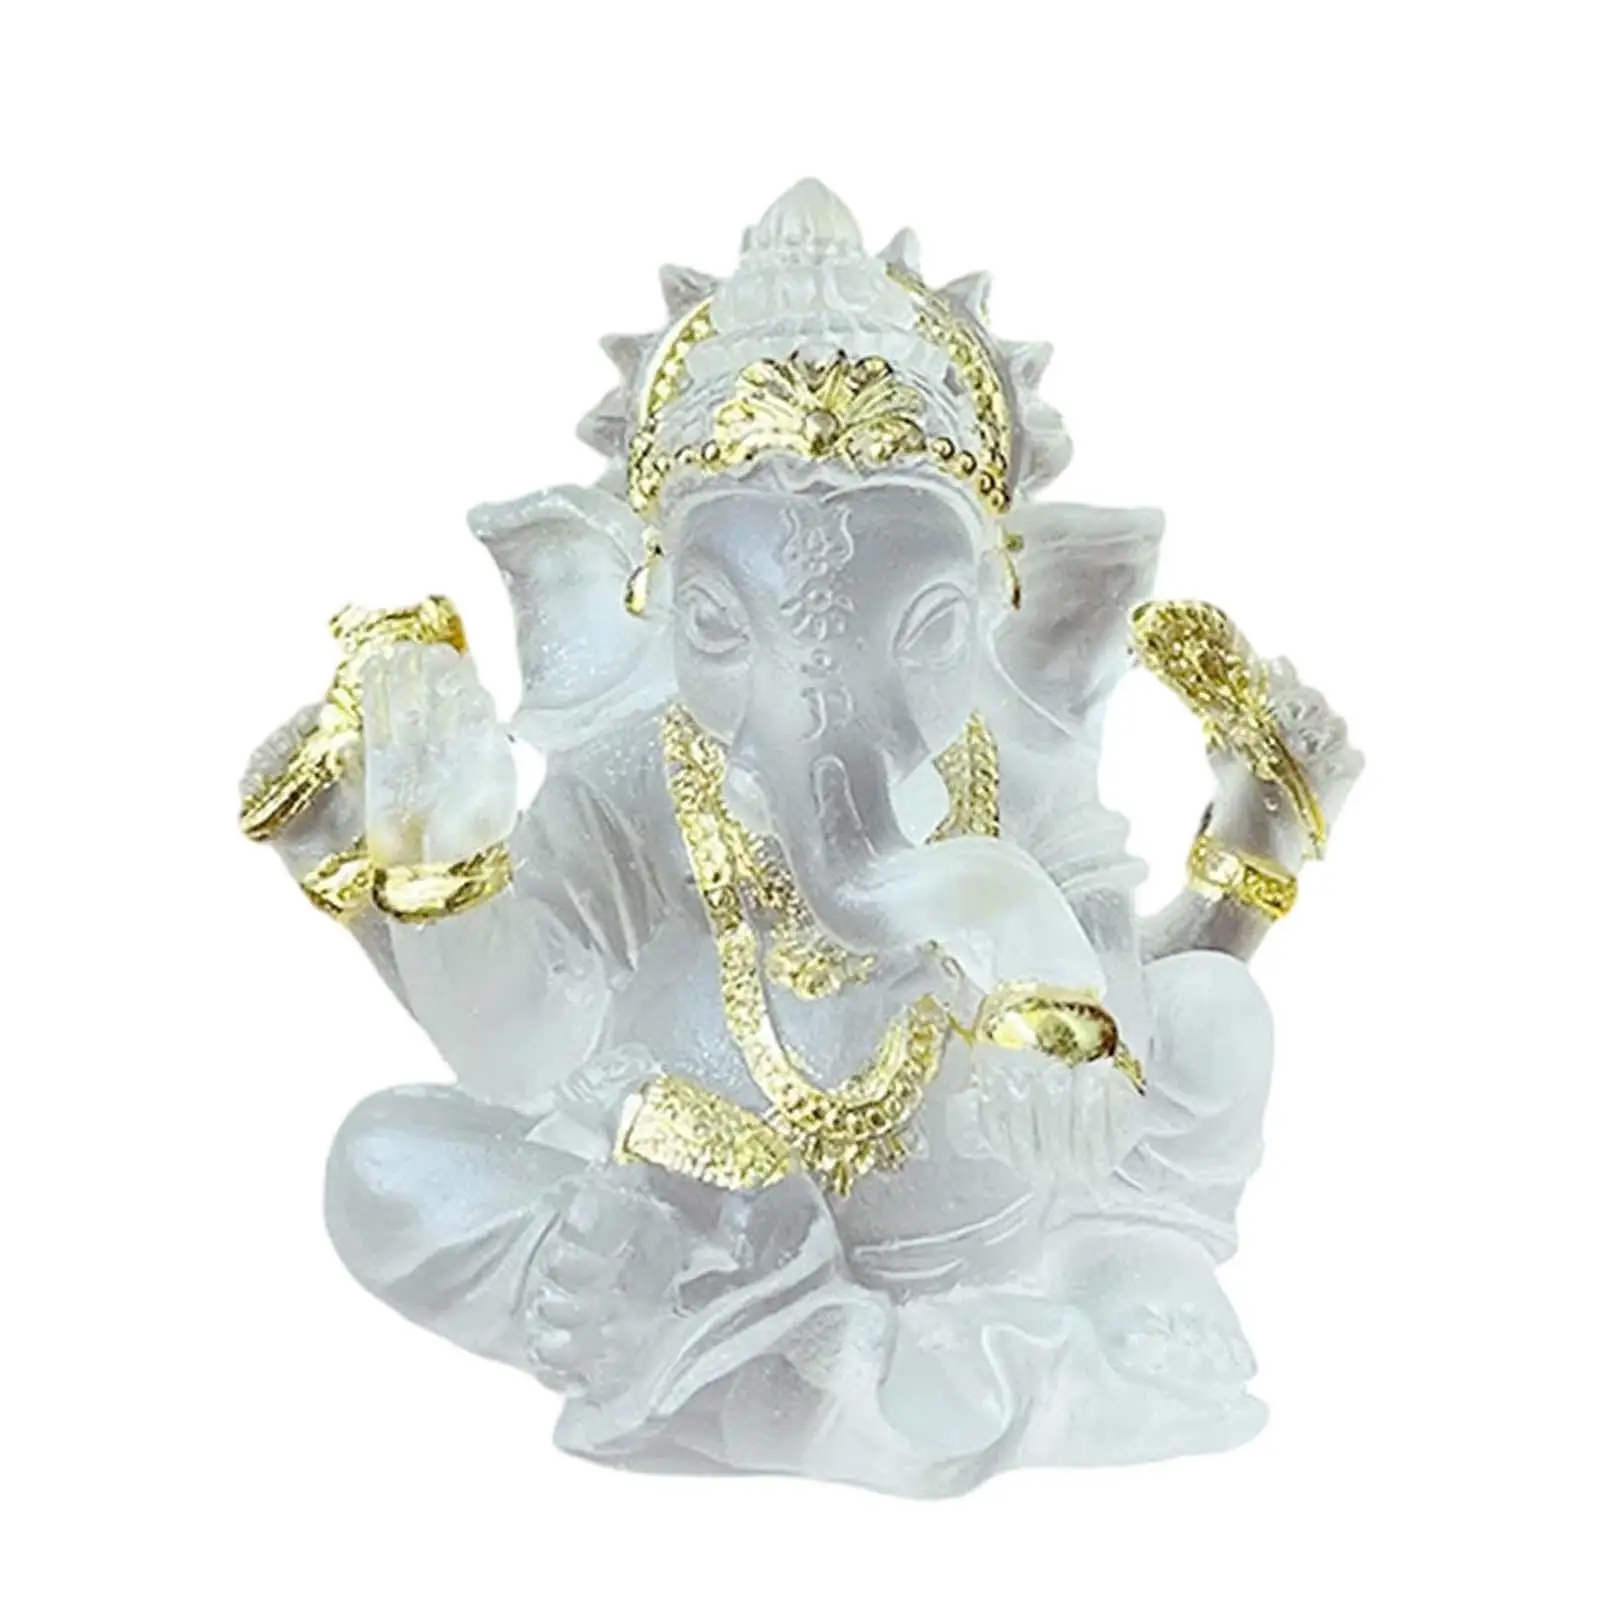 Translucent Elephant Ganesha Buddha Statue Lifelike Vivid Height 8cm Collection Craft for Home Office Tabletop Easily Clean